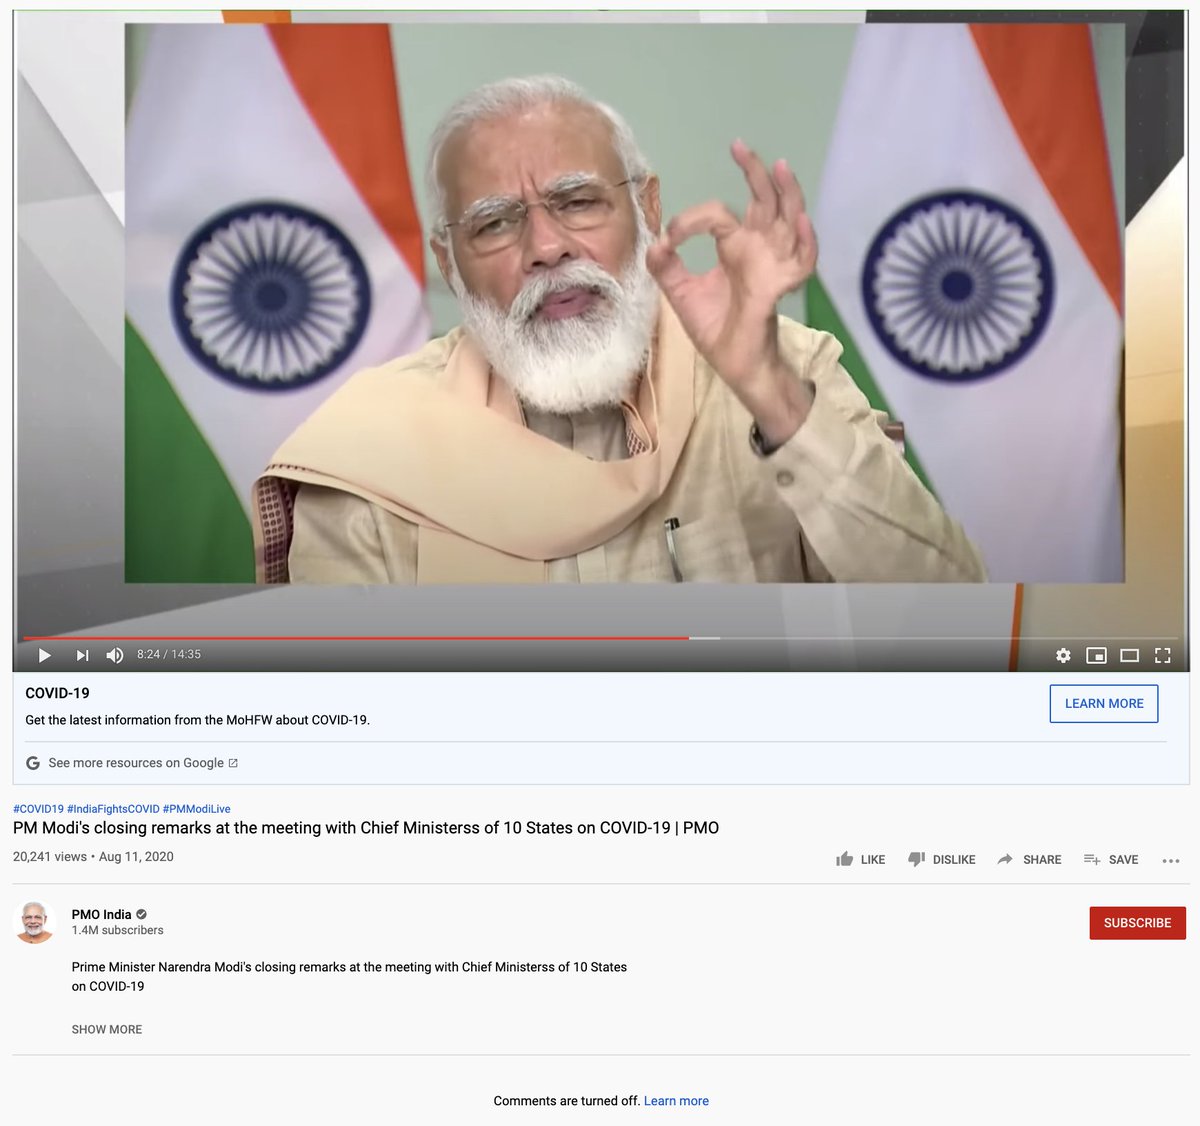 2/3 ...the PMO India YouTube channel has turned off all kinds of digital engagement possibilities on several videos. This includes the comments section being disabled (meaning old comments won't show) and also Likes and Dislikes.